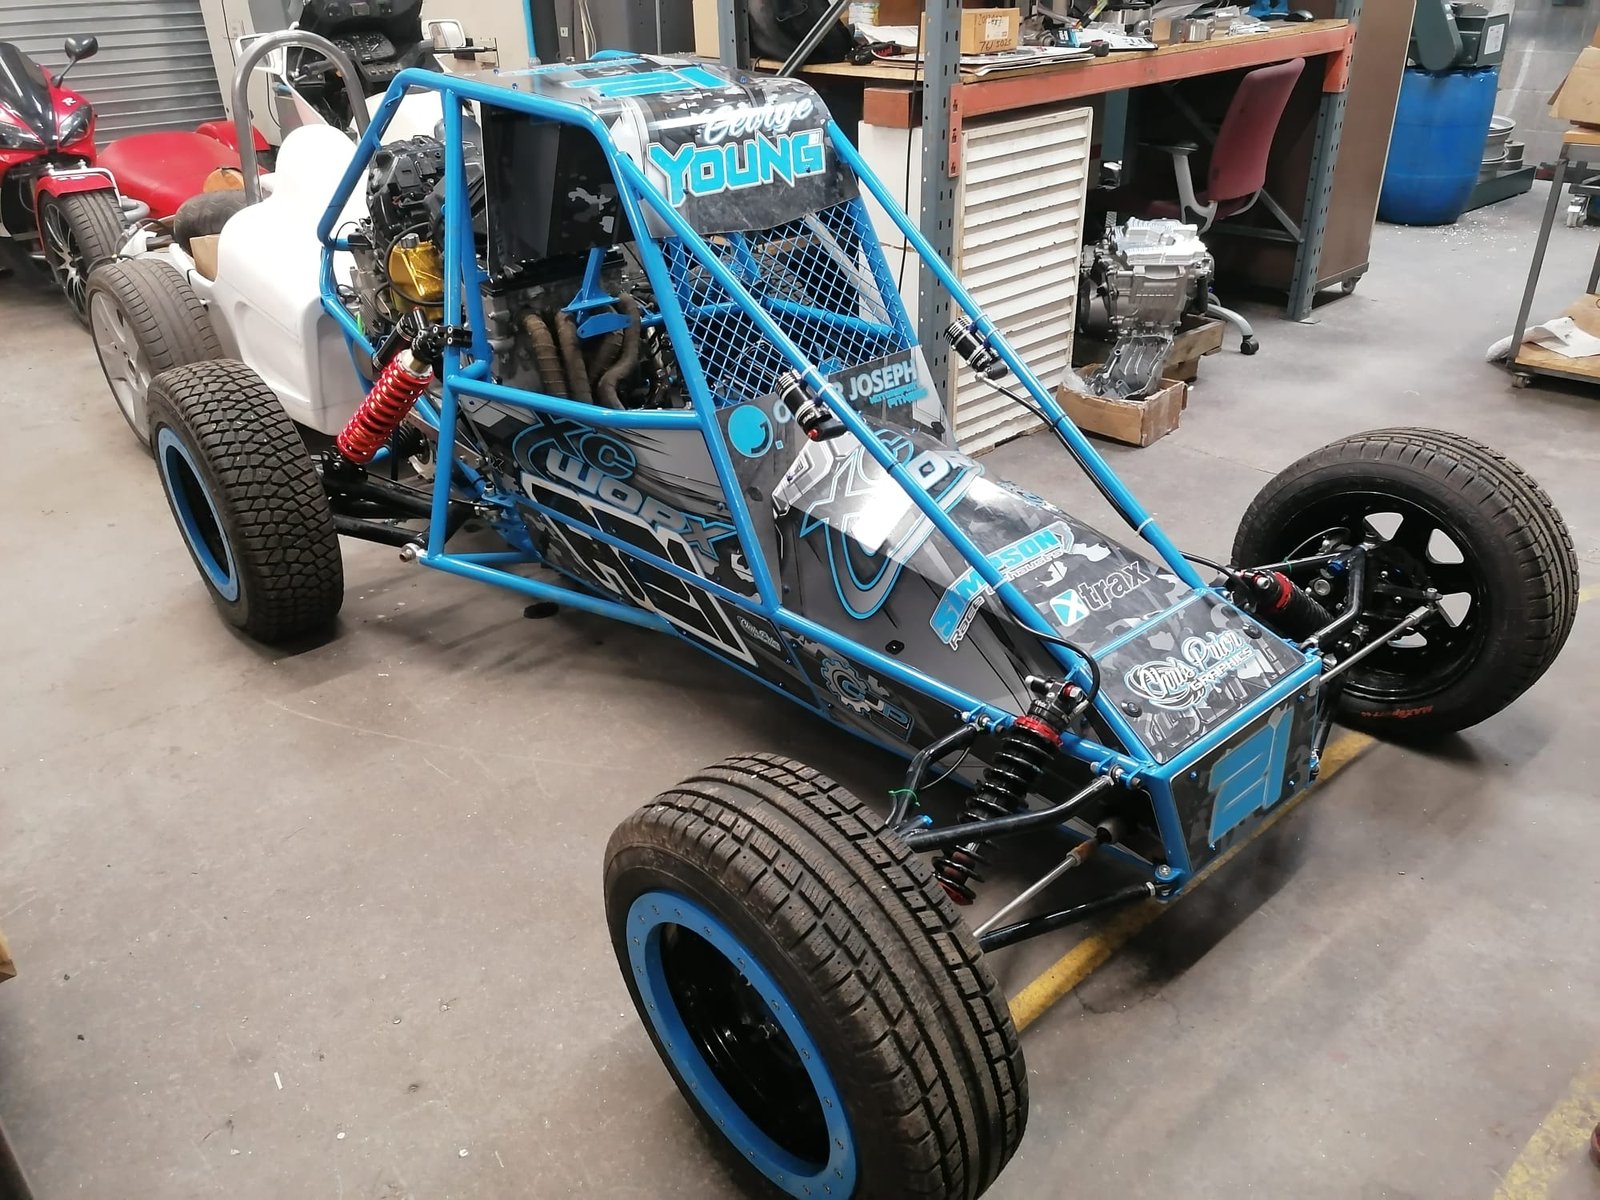 Image of 2 zxr10 engined autograss car dry sump 008 <h2>2022-01-15 - When too much just isn't quite enough…</h2>